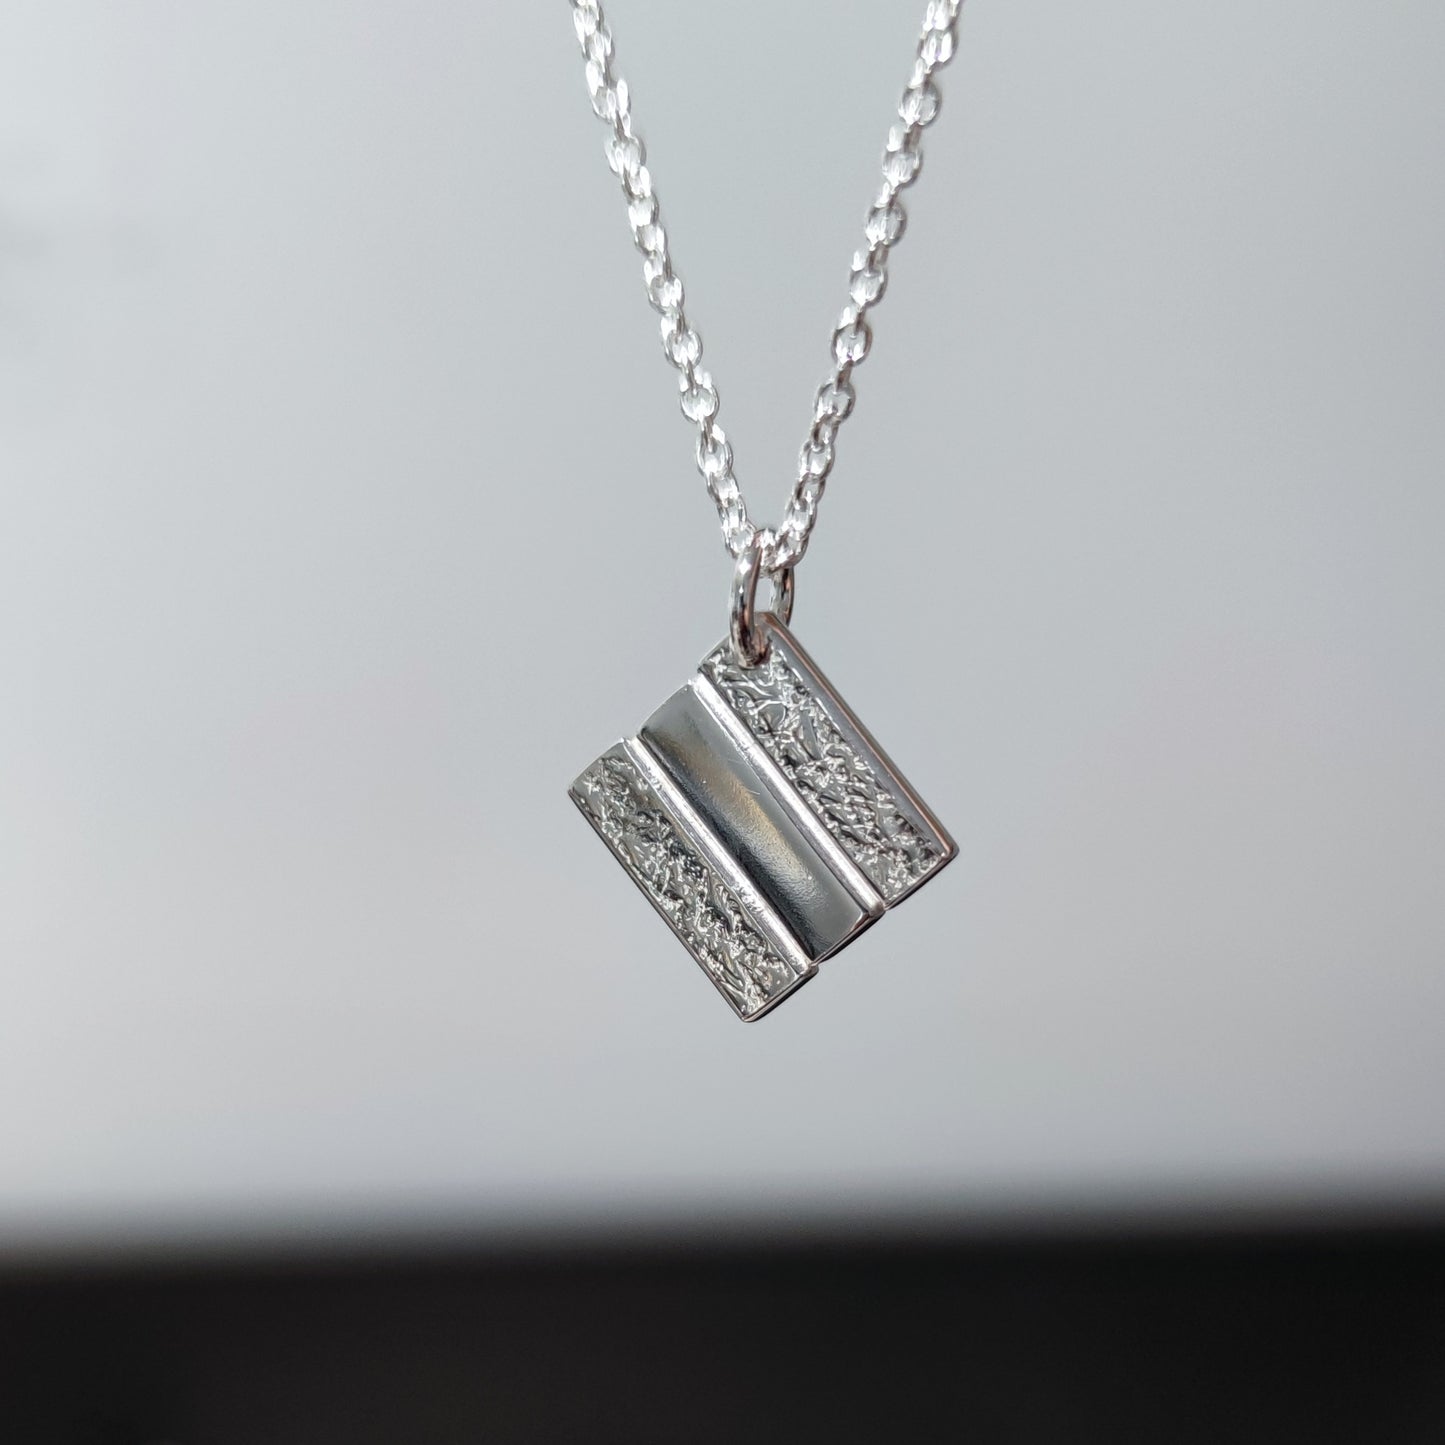 handmade textured sterling silver stack pendant